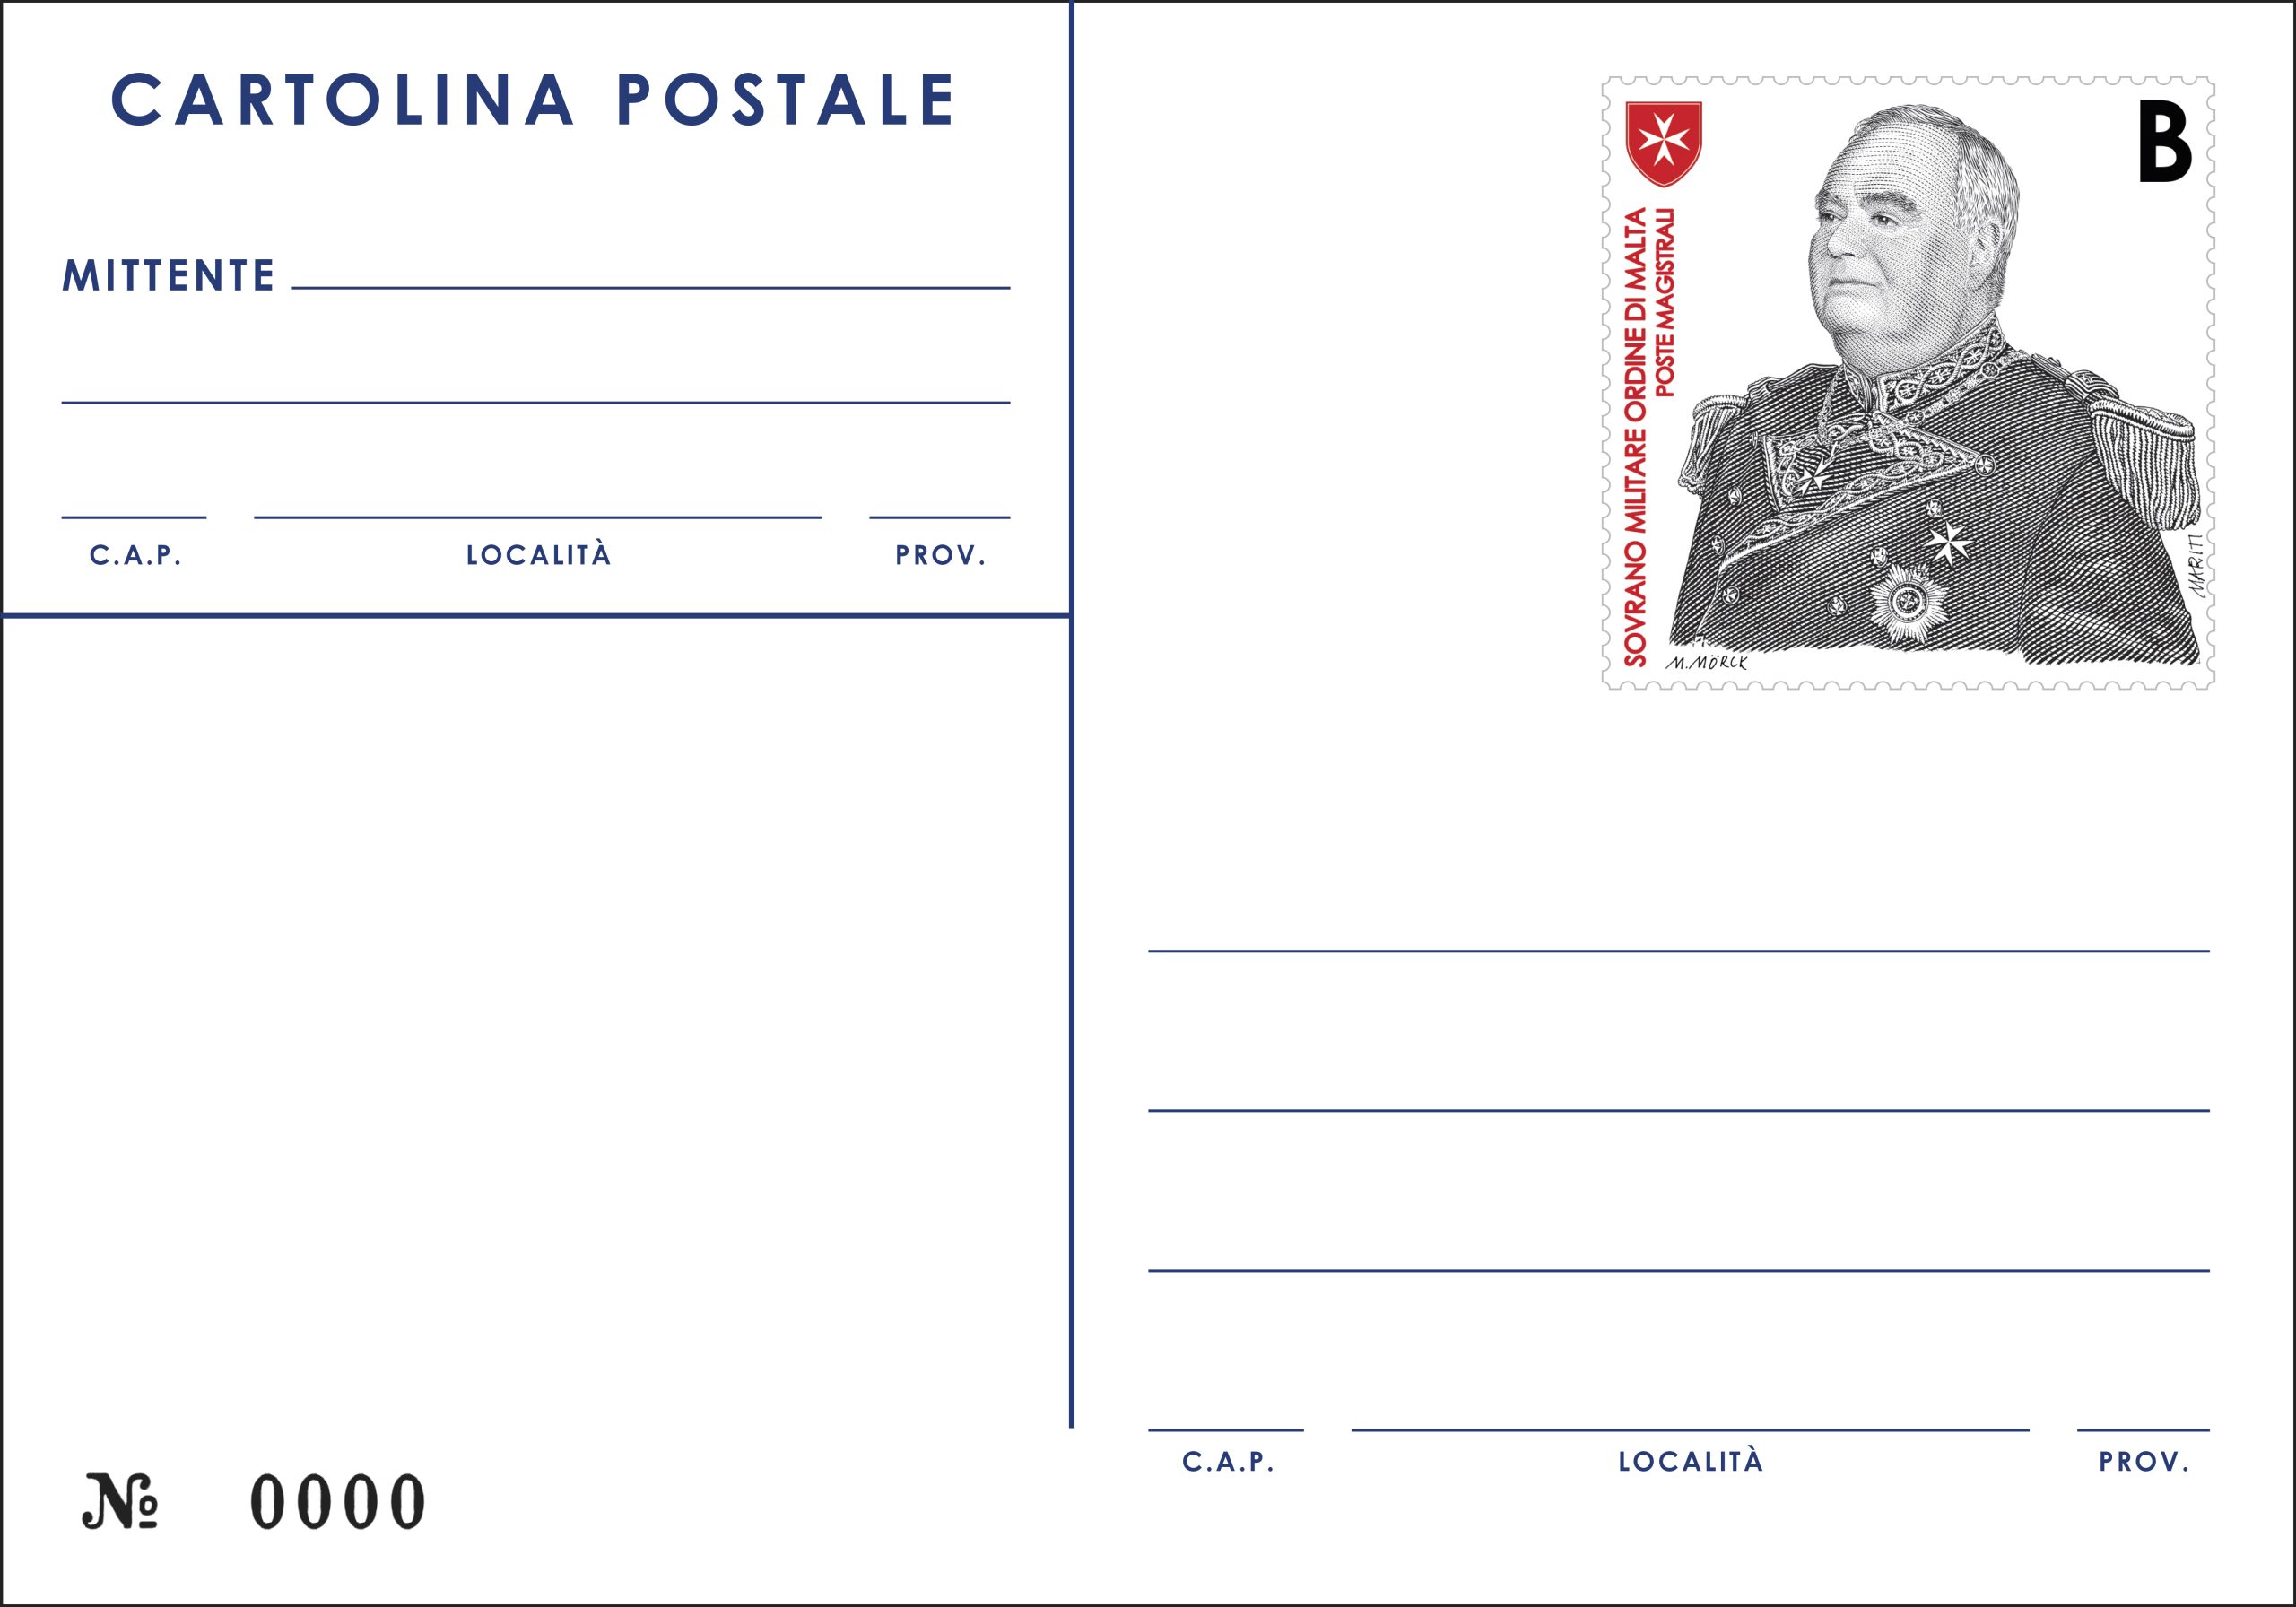 The new postal issues of 22nd September 2023